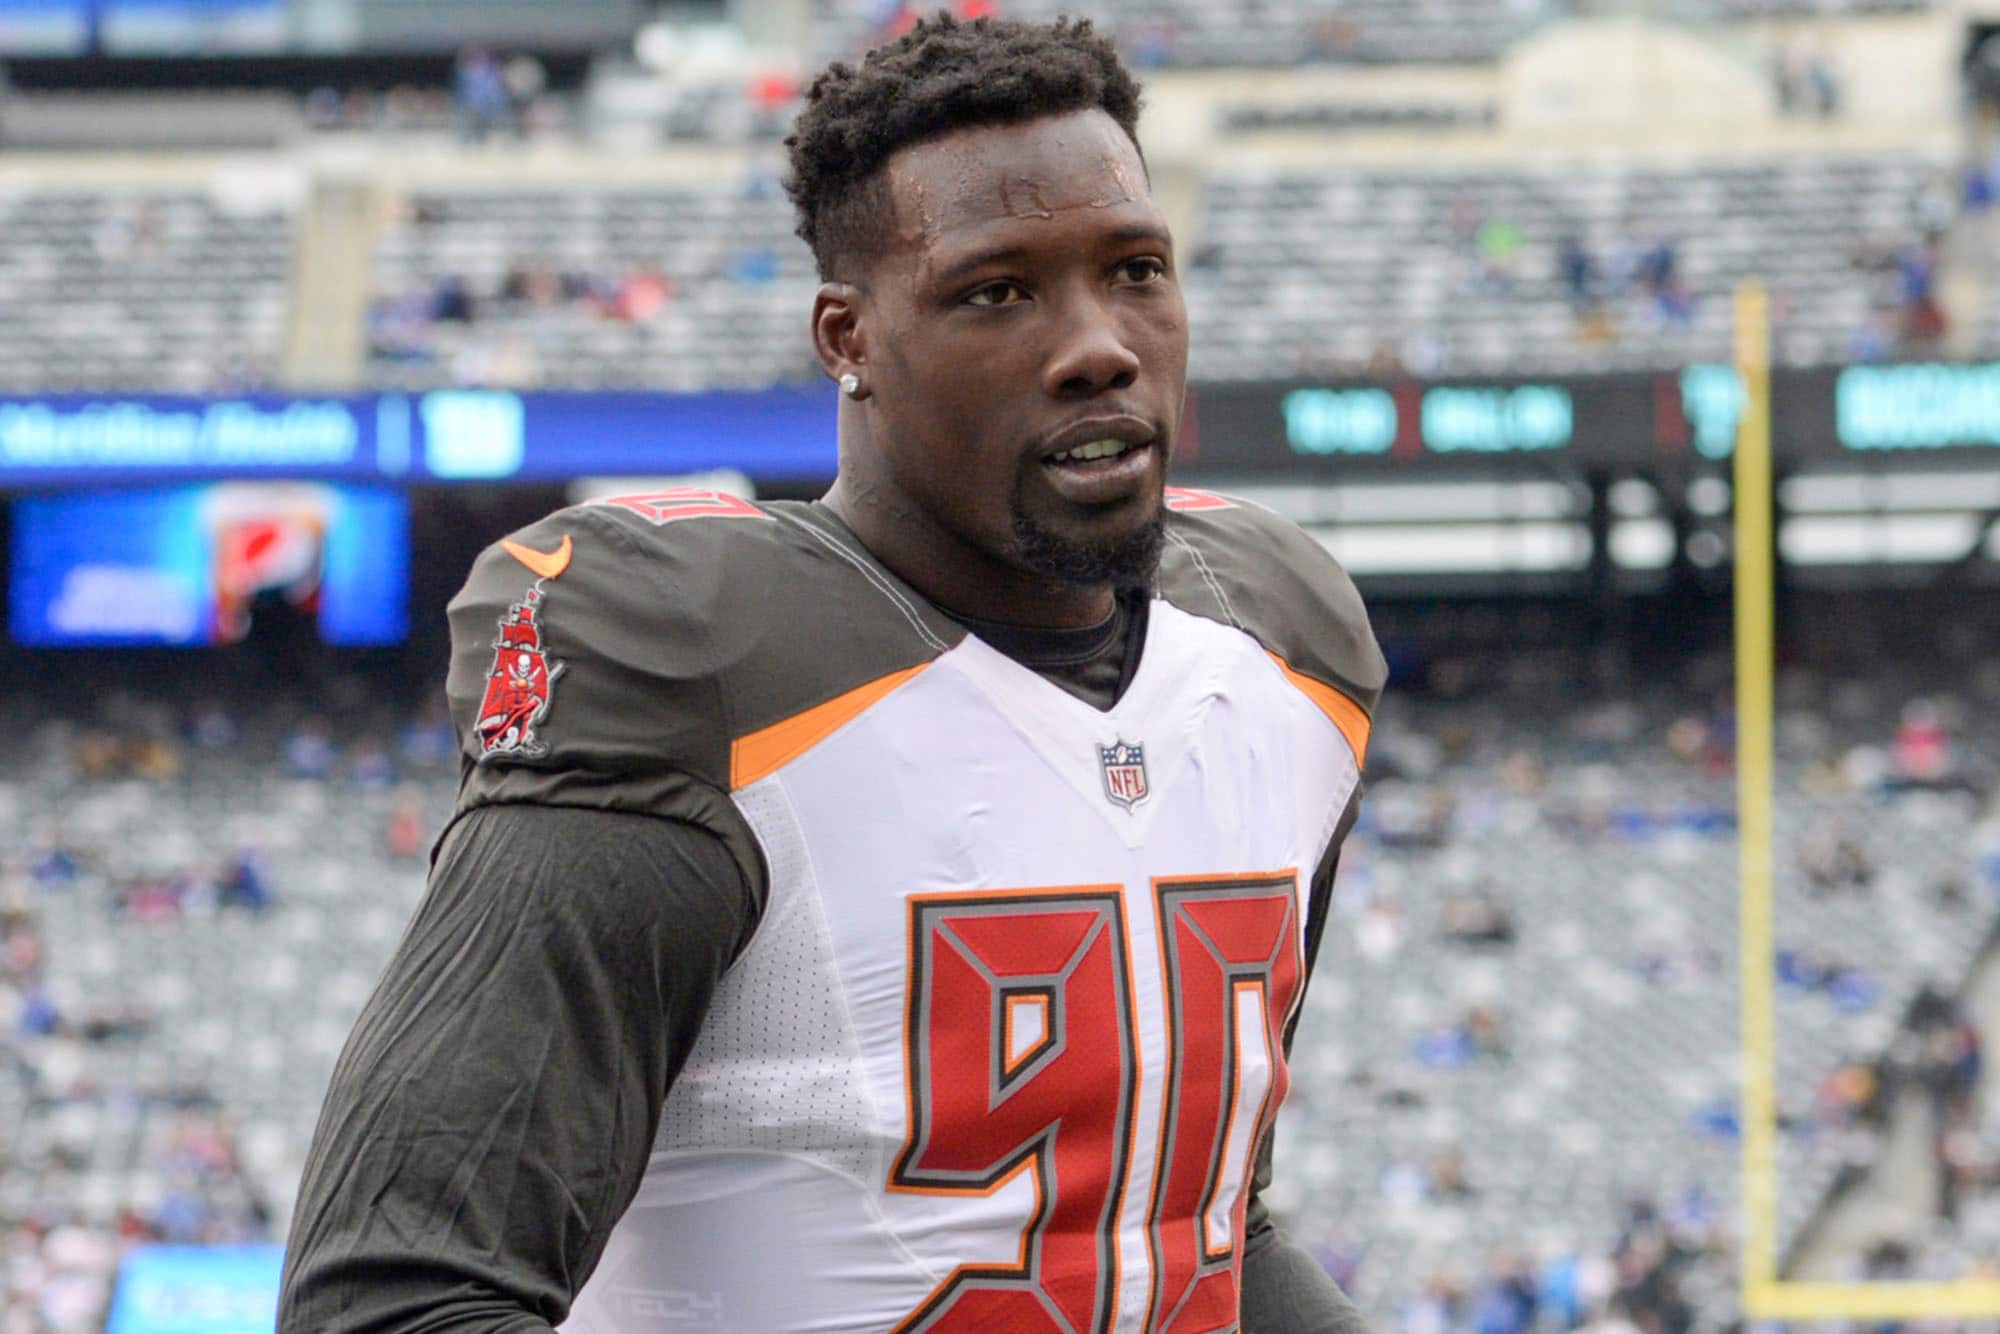 Jason Pierre-Paul Reportedly Fractured His Neck In A Car Accident, Could Miss The Entire 2019 NFL Season